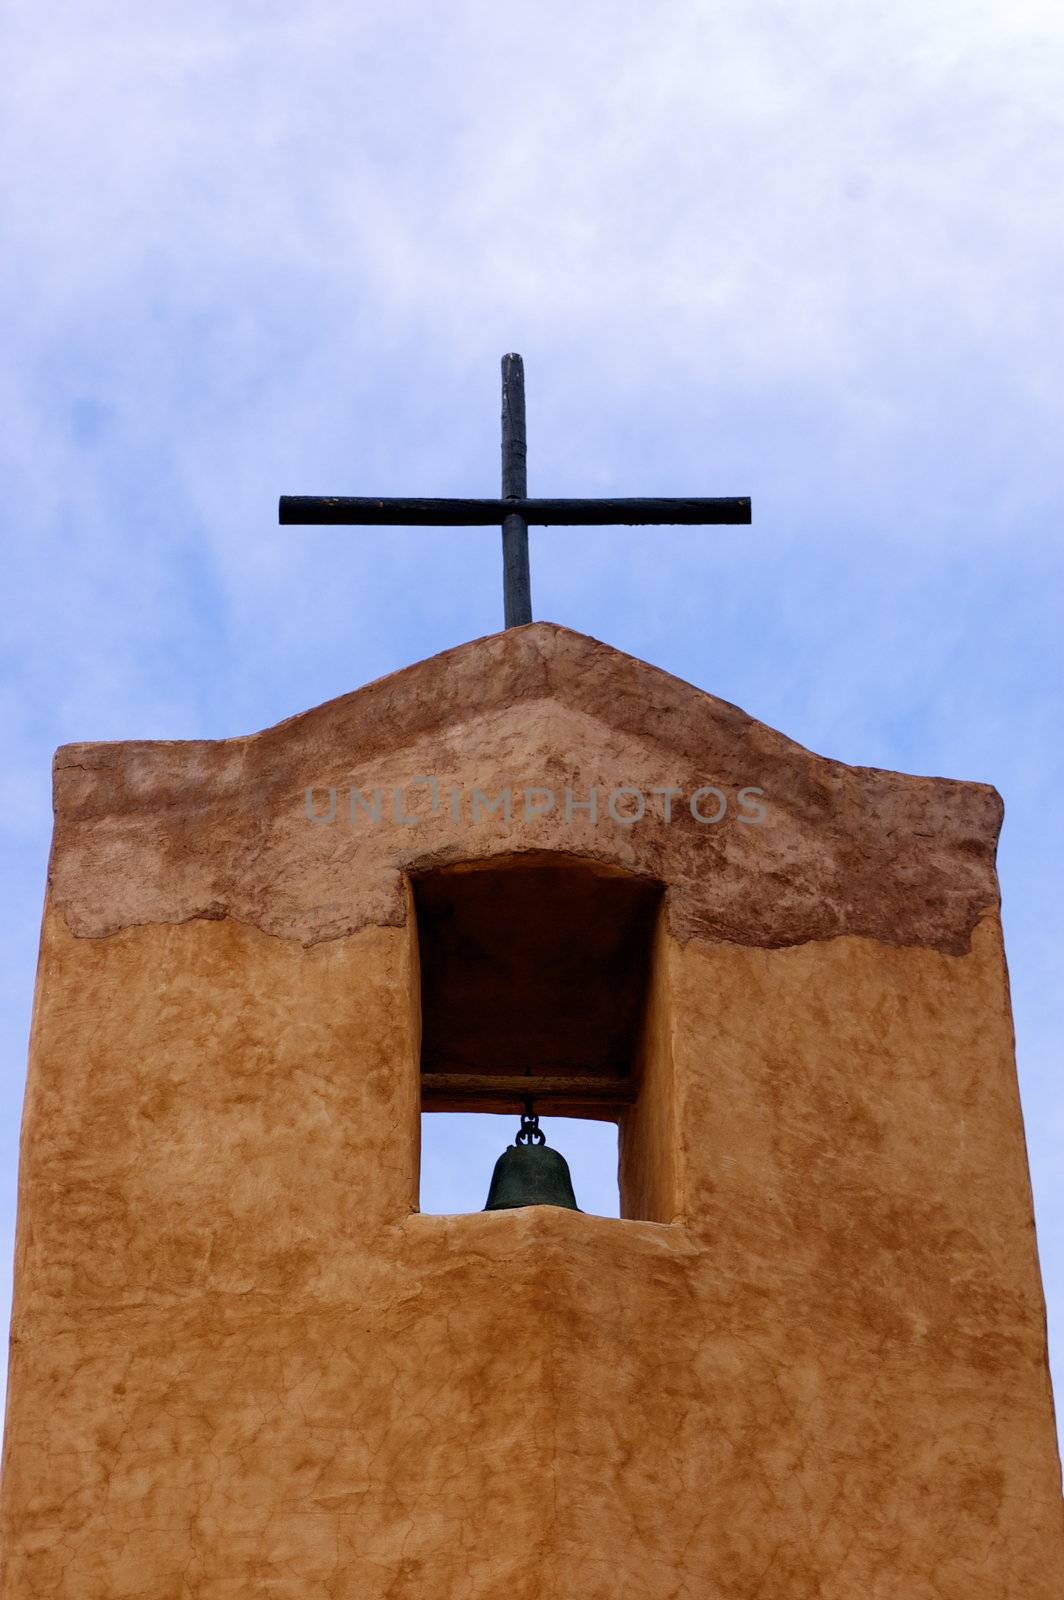 New Mexican Adobe Church bell tower with cross, against a blue sky with copy space.